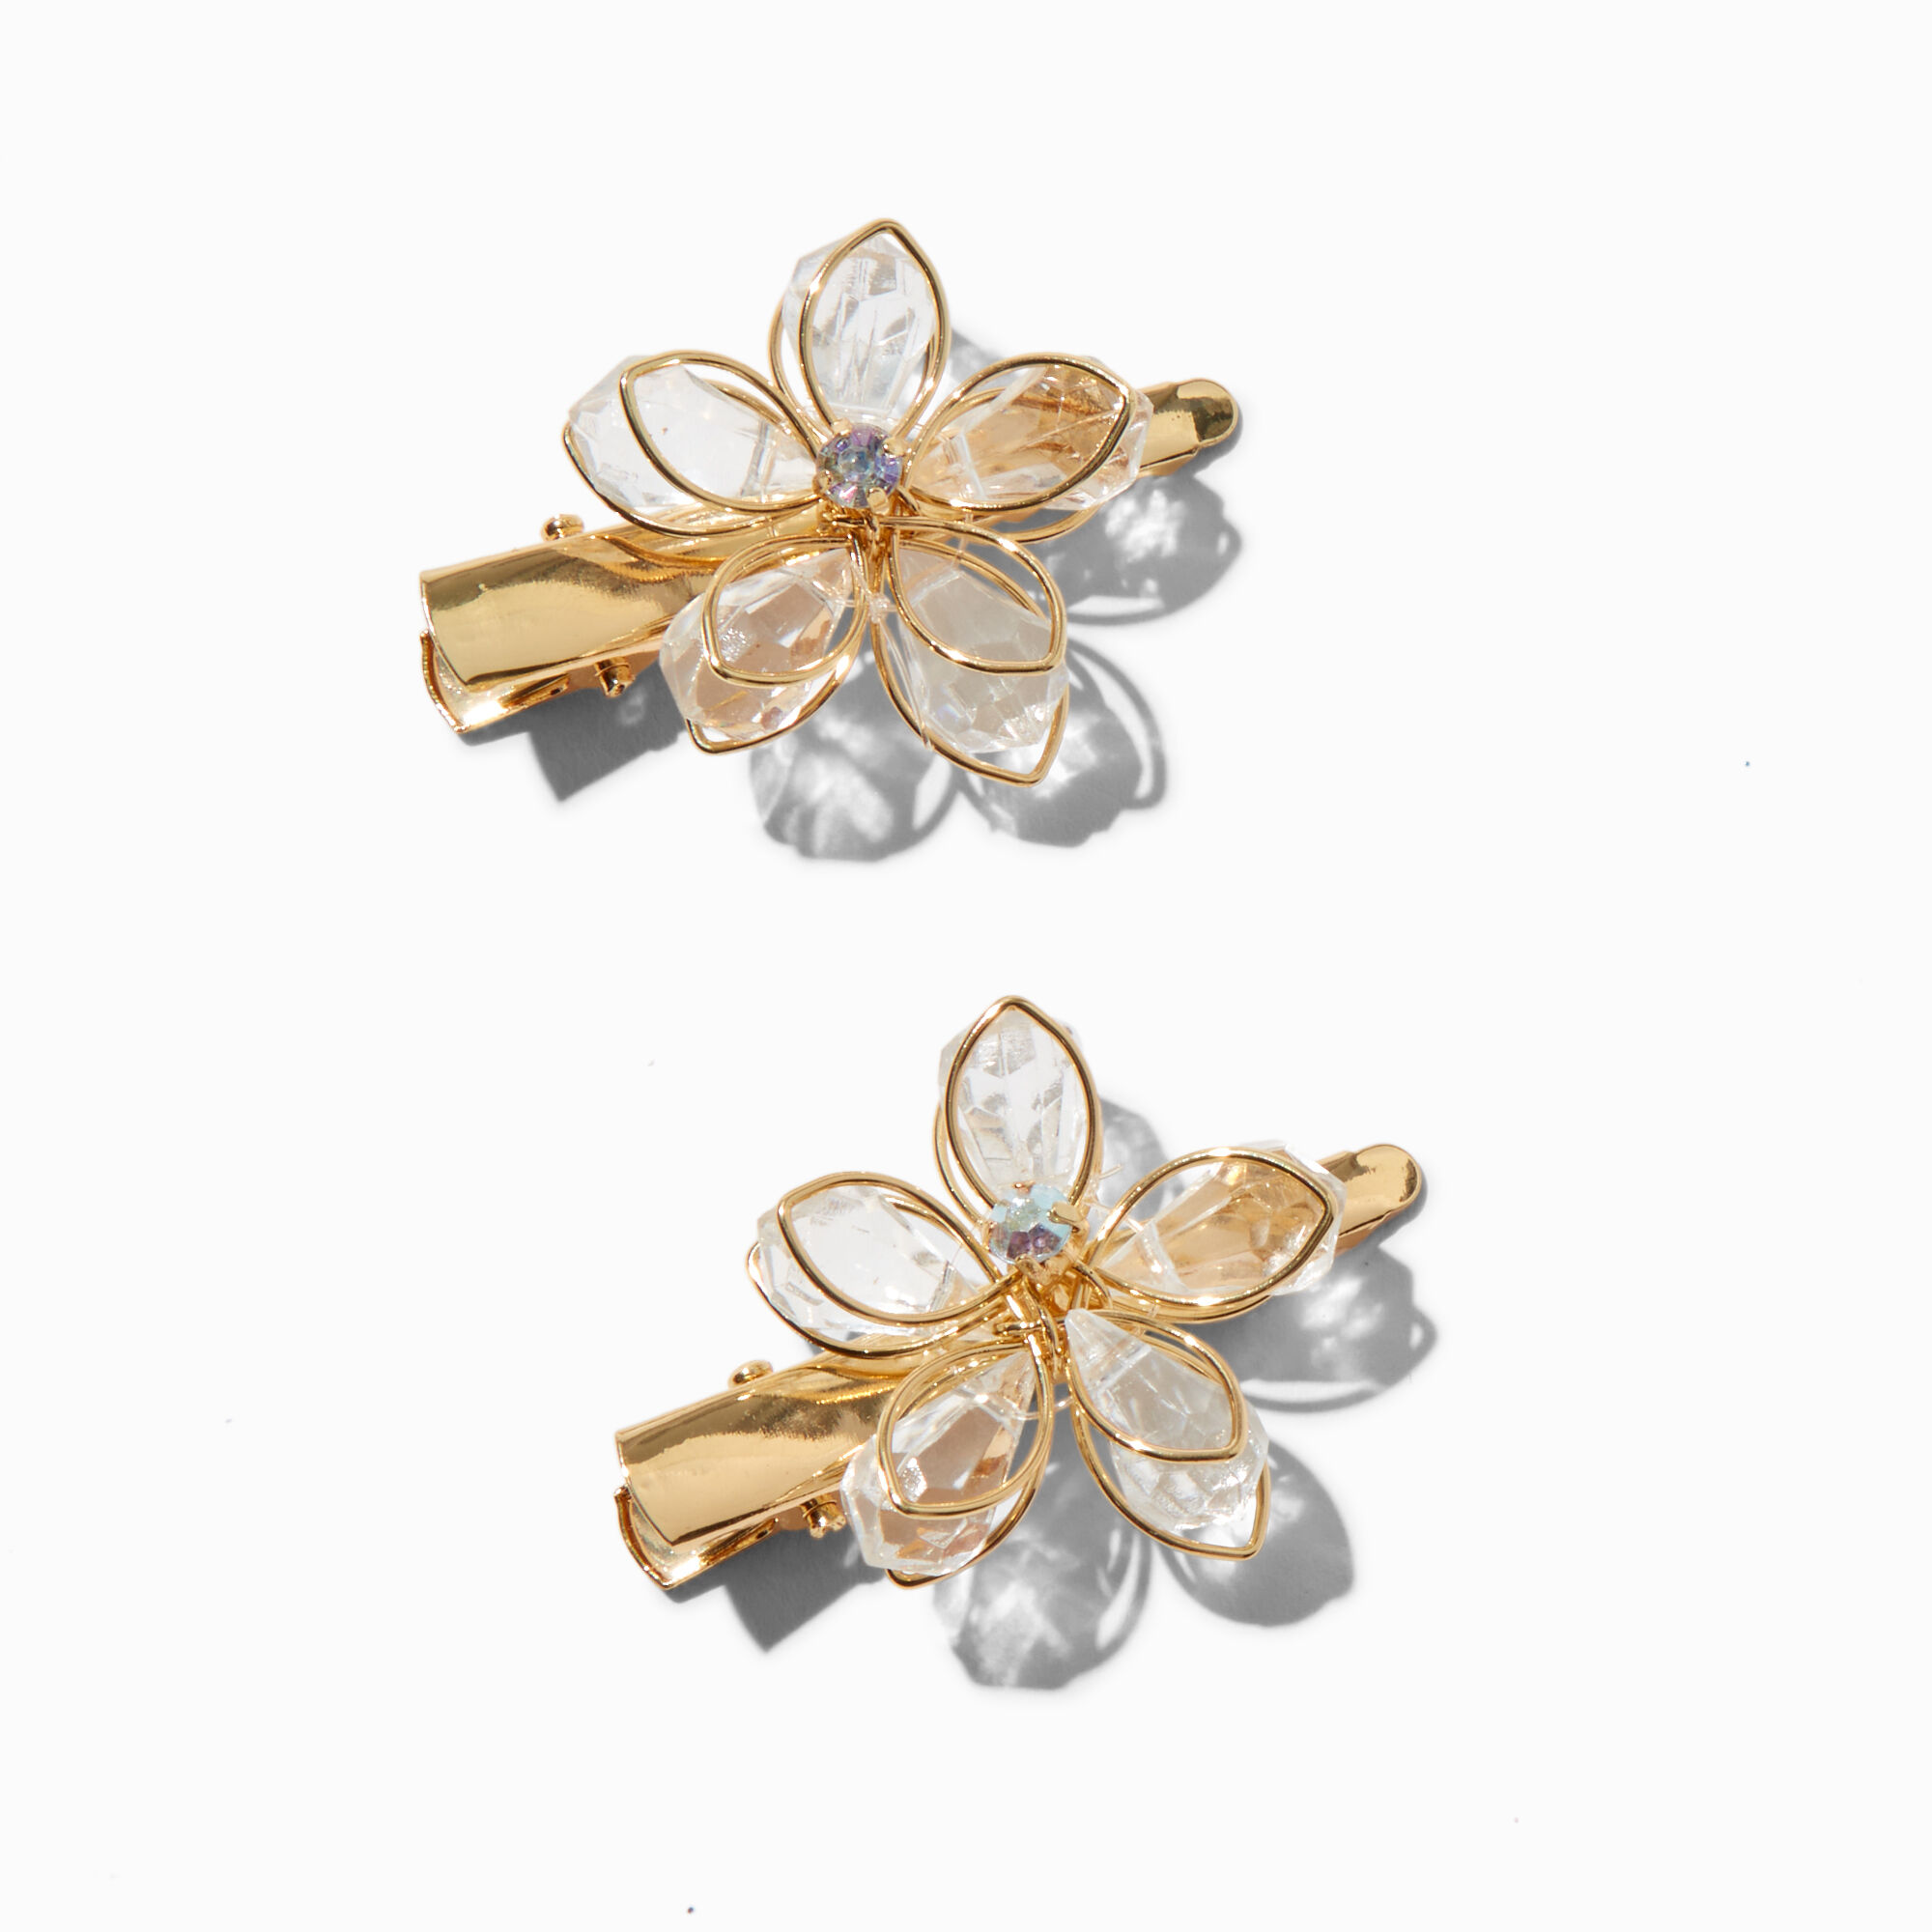 View Claires Club Gem Flower Tone Hair Clips 2 Pack Gold information